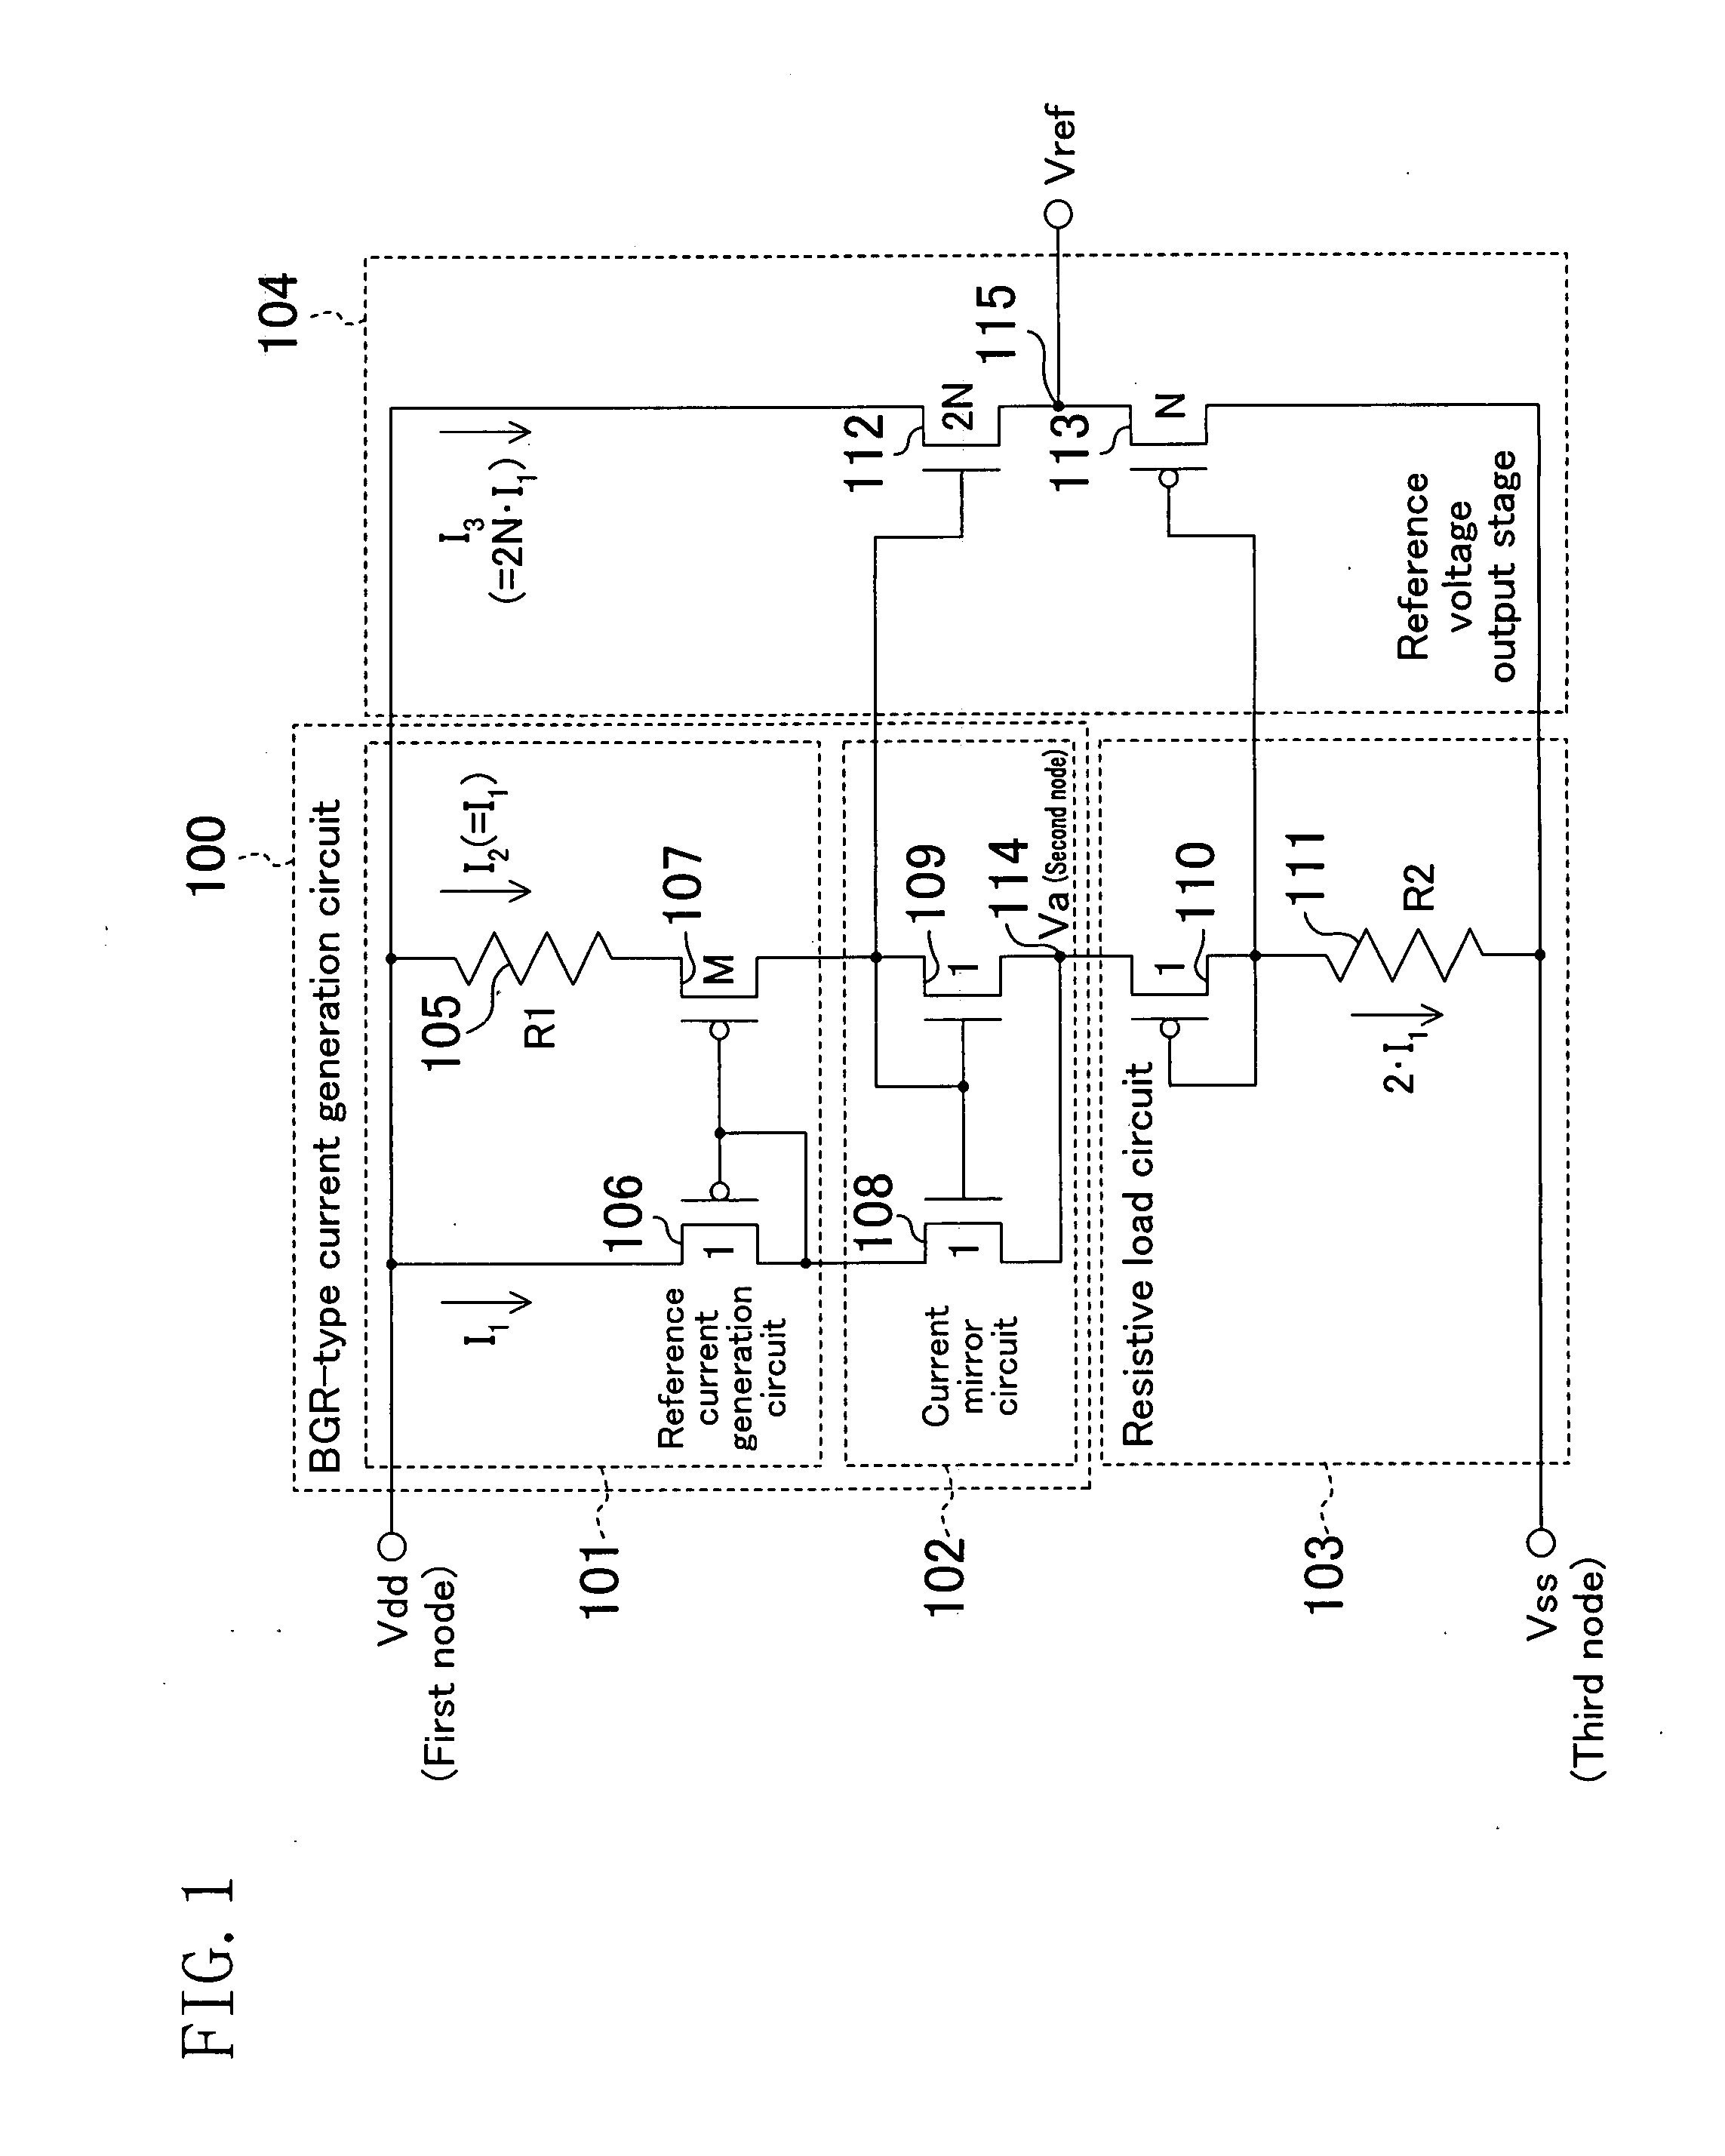 Reference voltage generation circuit